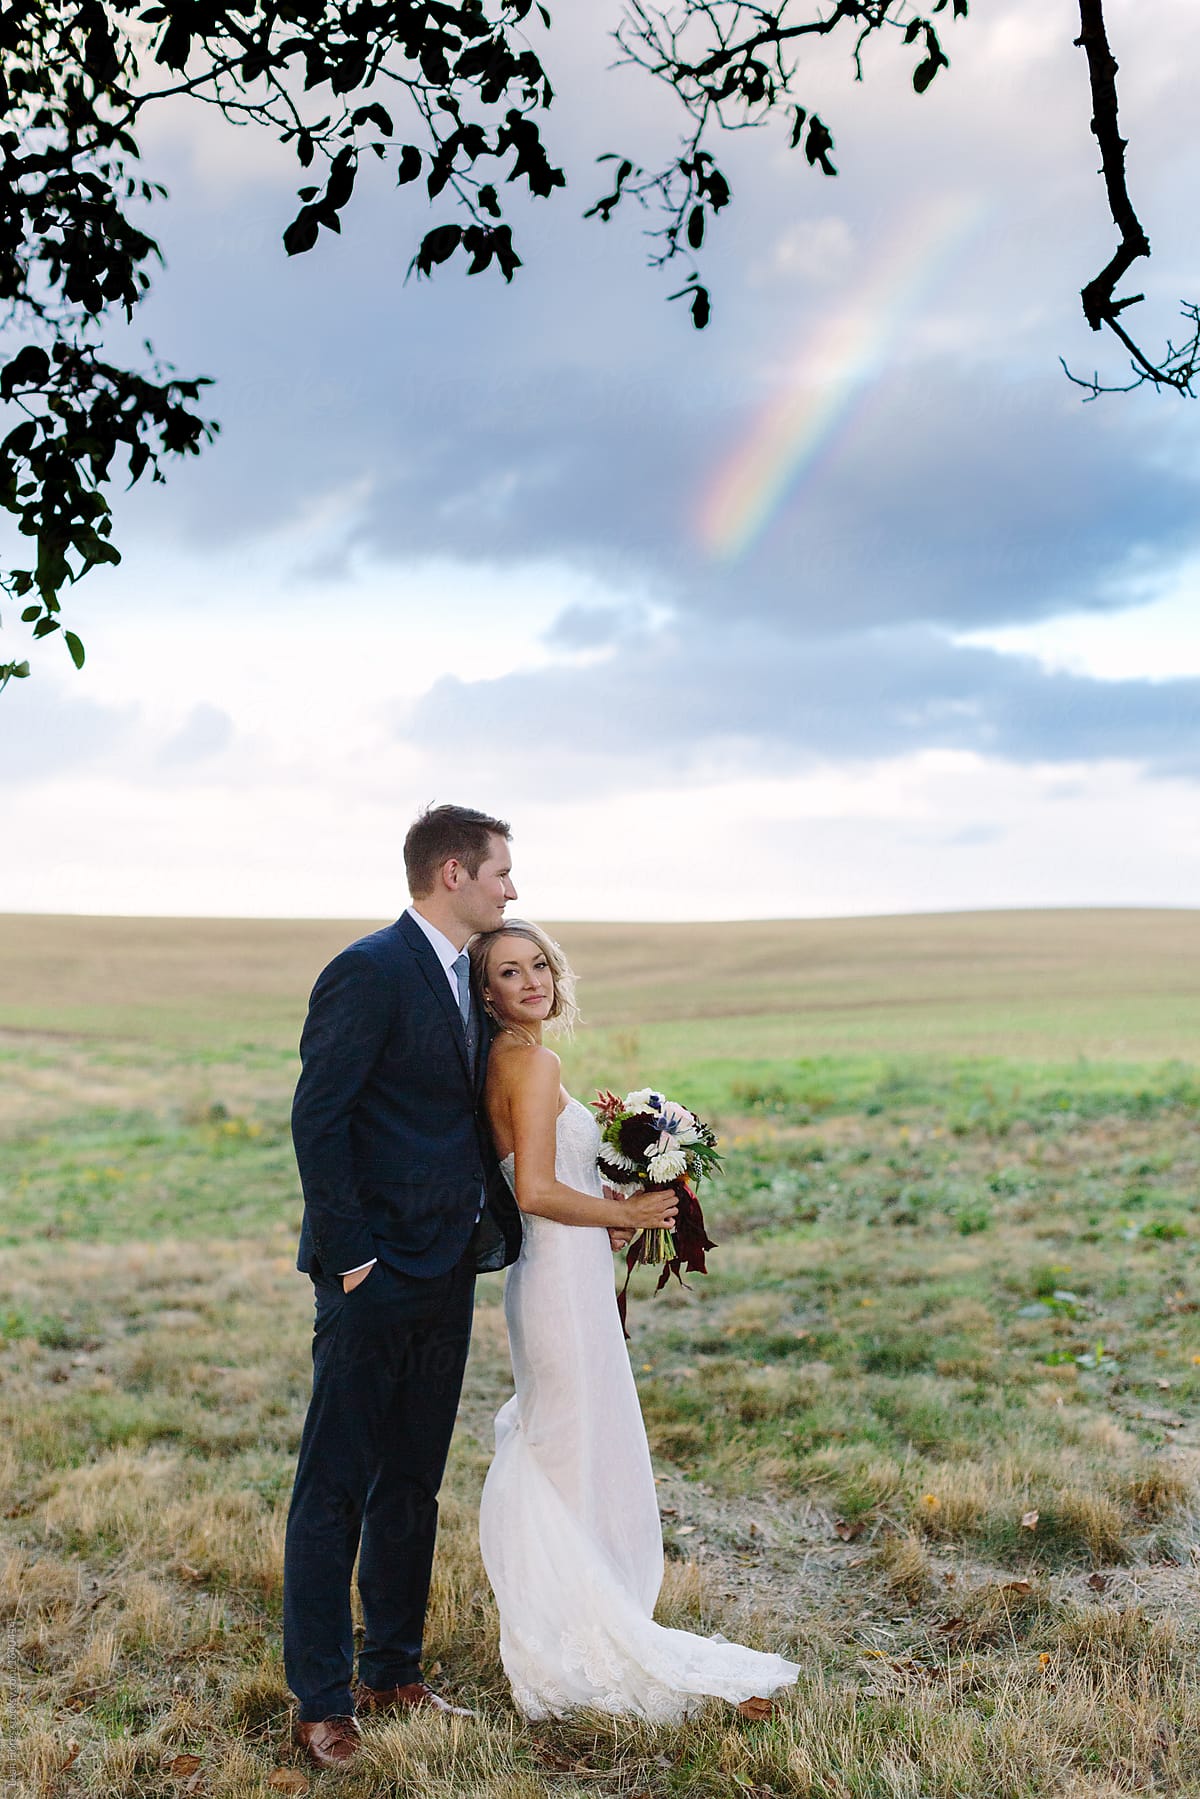 Beautiful Wedding Couple in Field under Sky with Rainbow